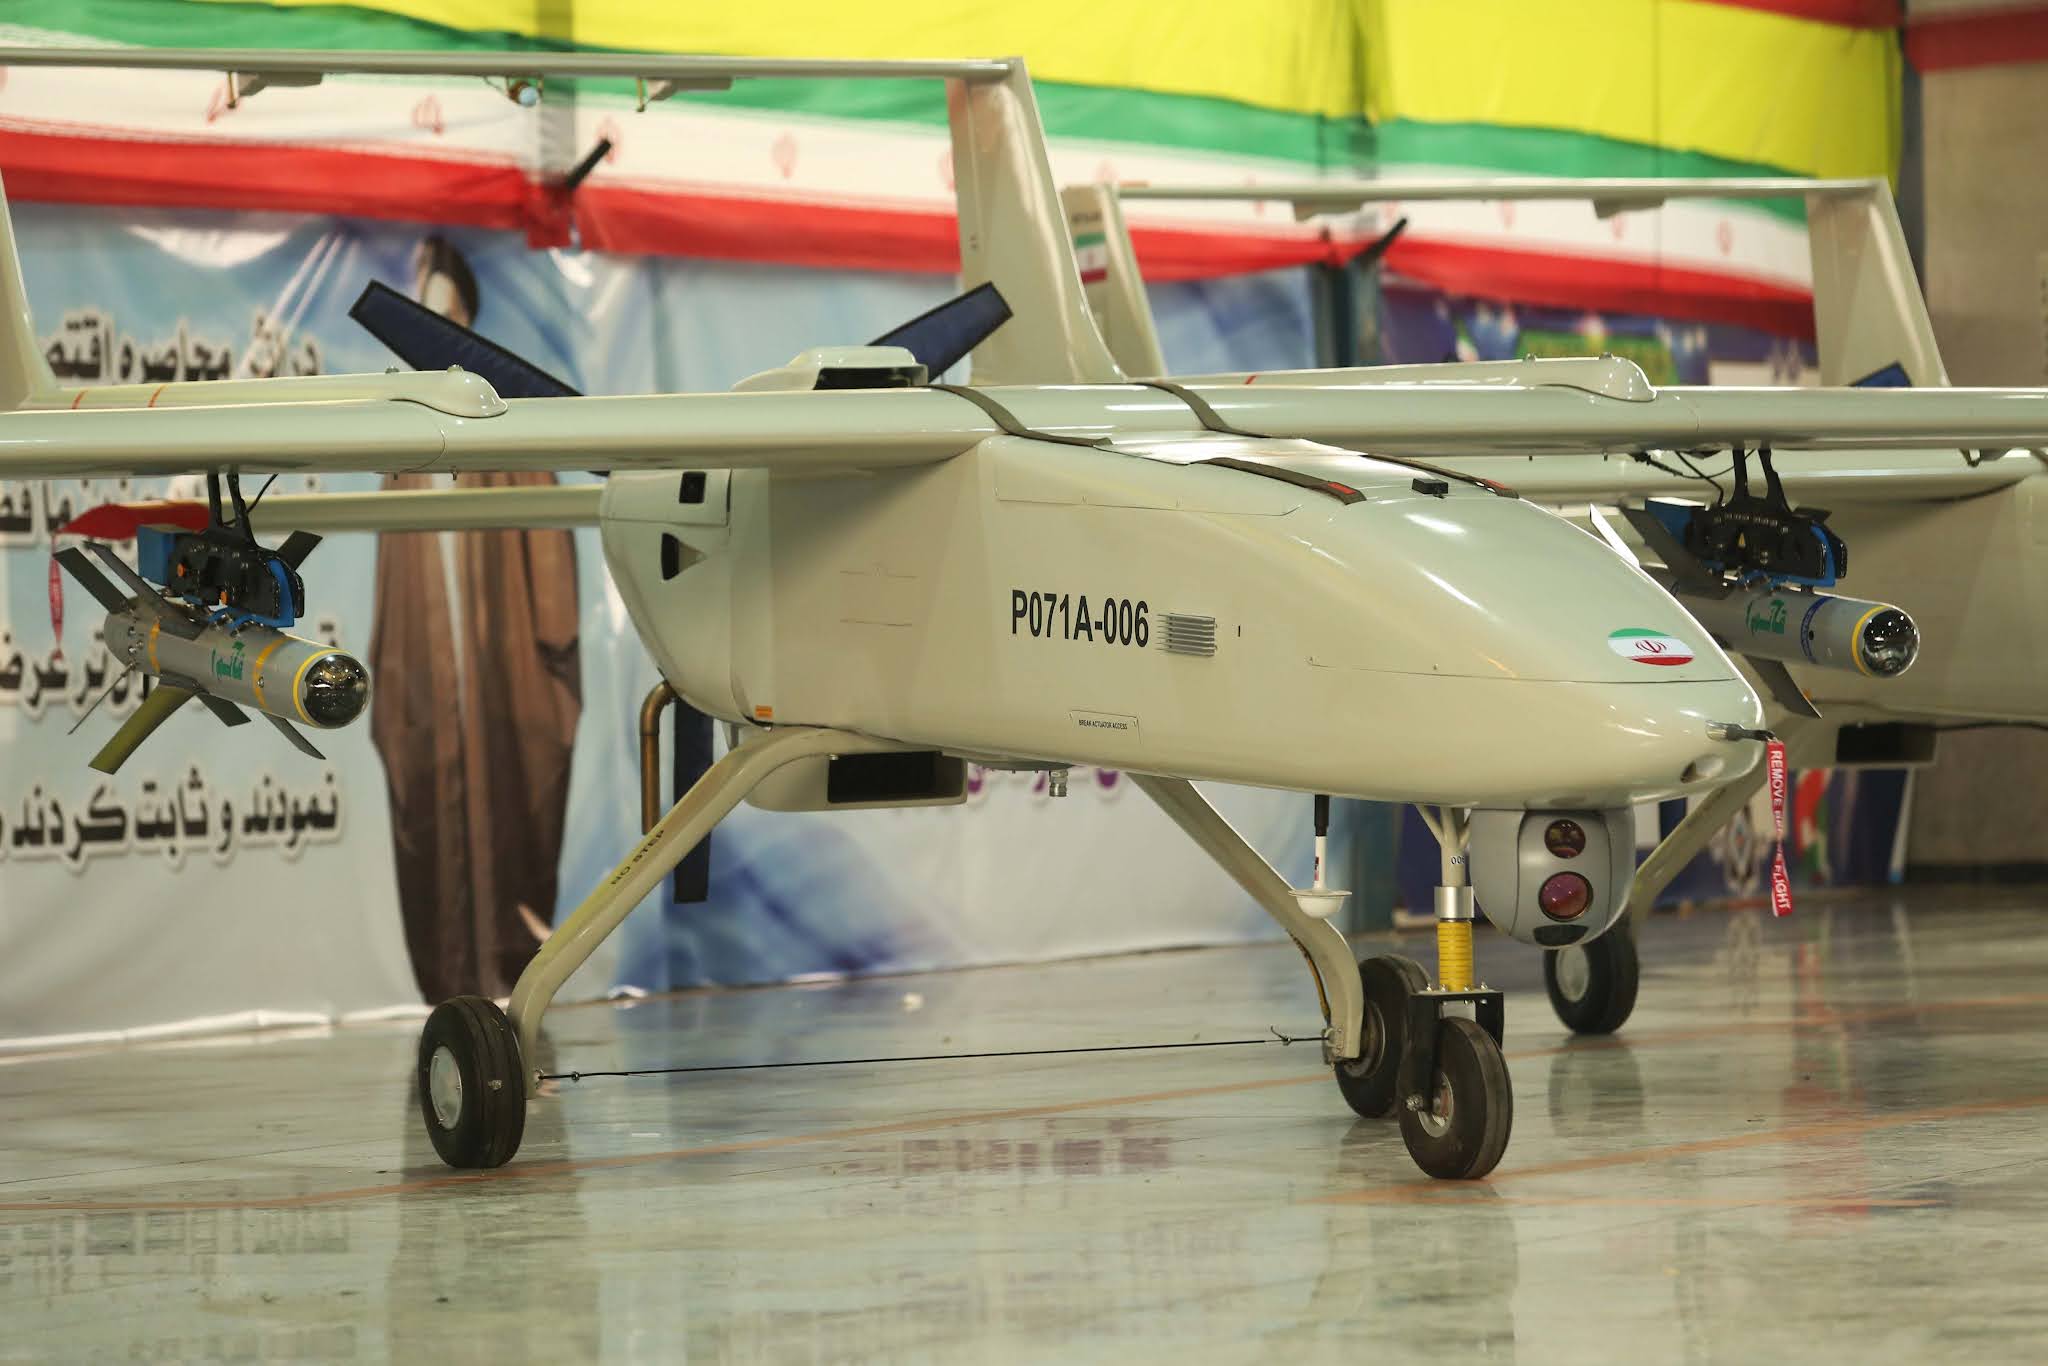 War in Ethiopia: Armed drones could be again a gamechanger